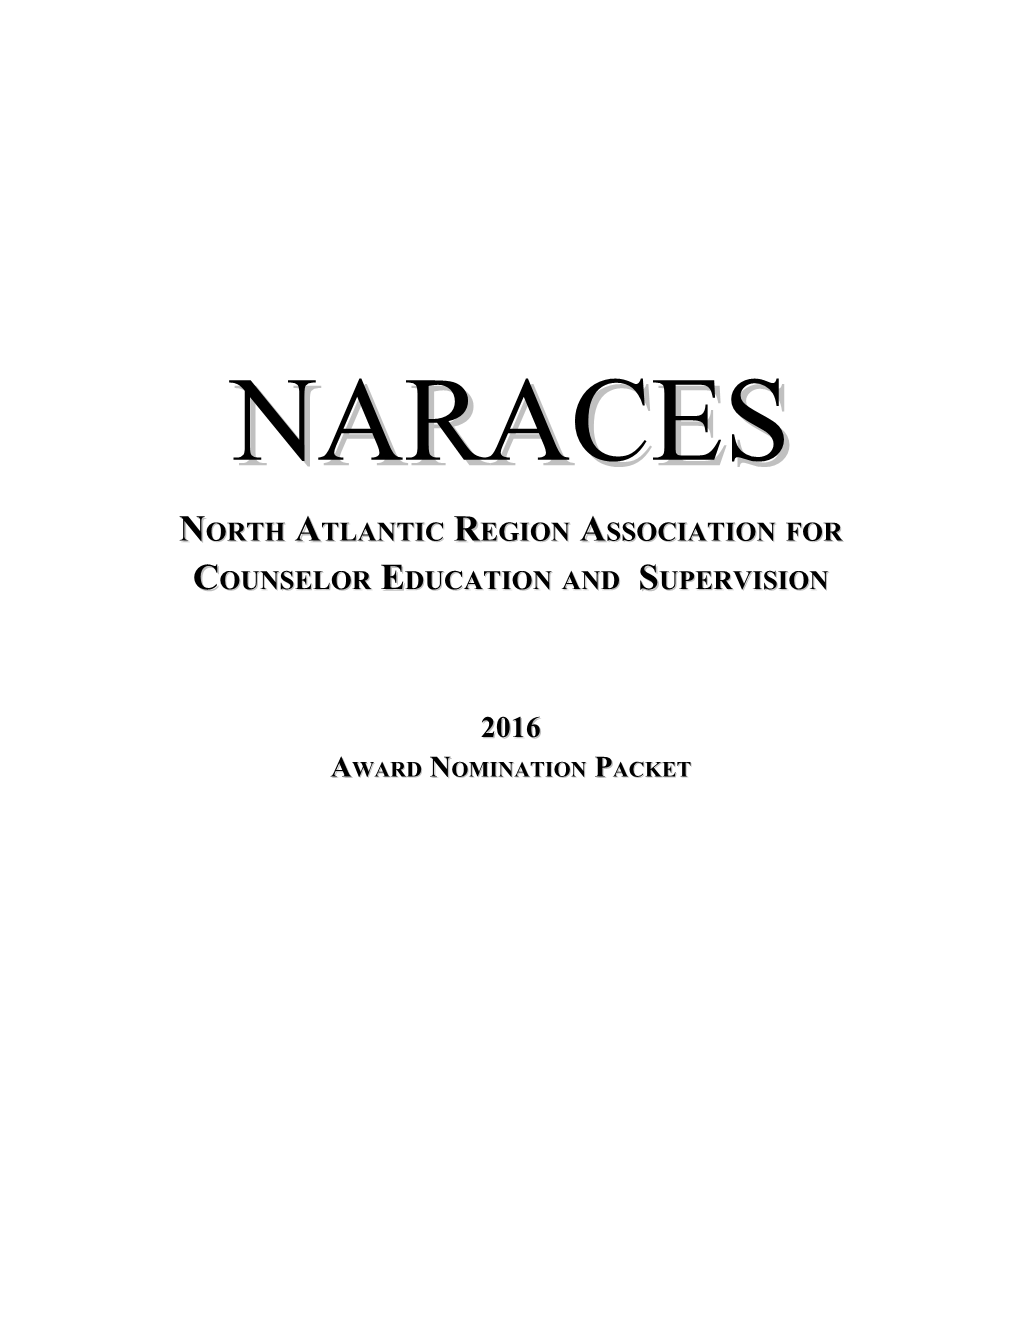 North Atlantic Region Association for Counselor Education and Supervision